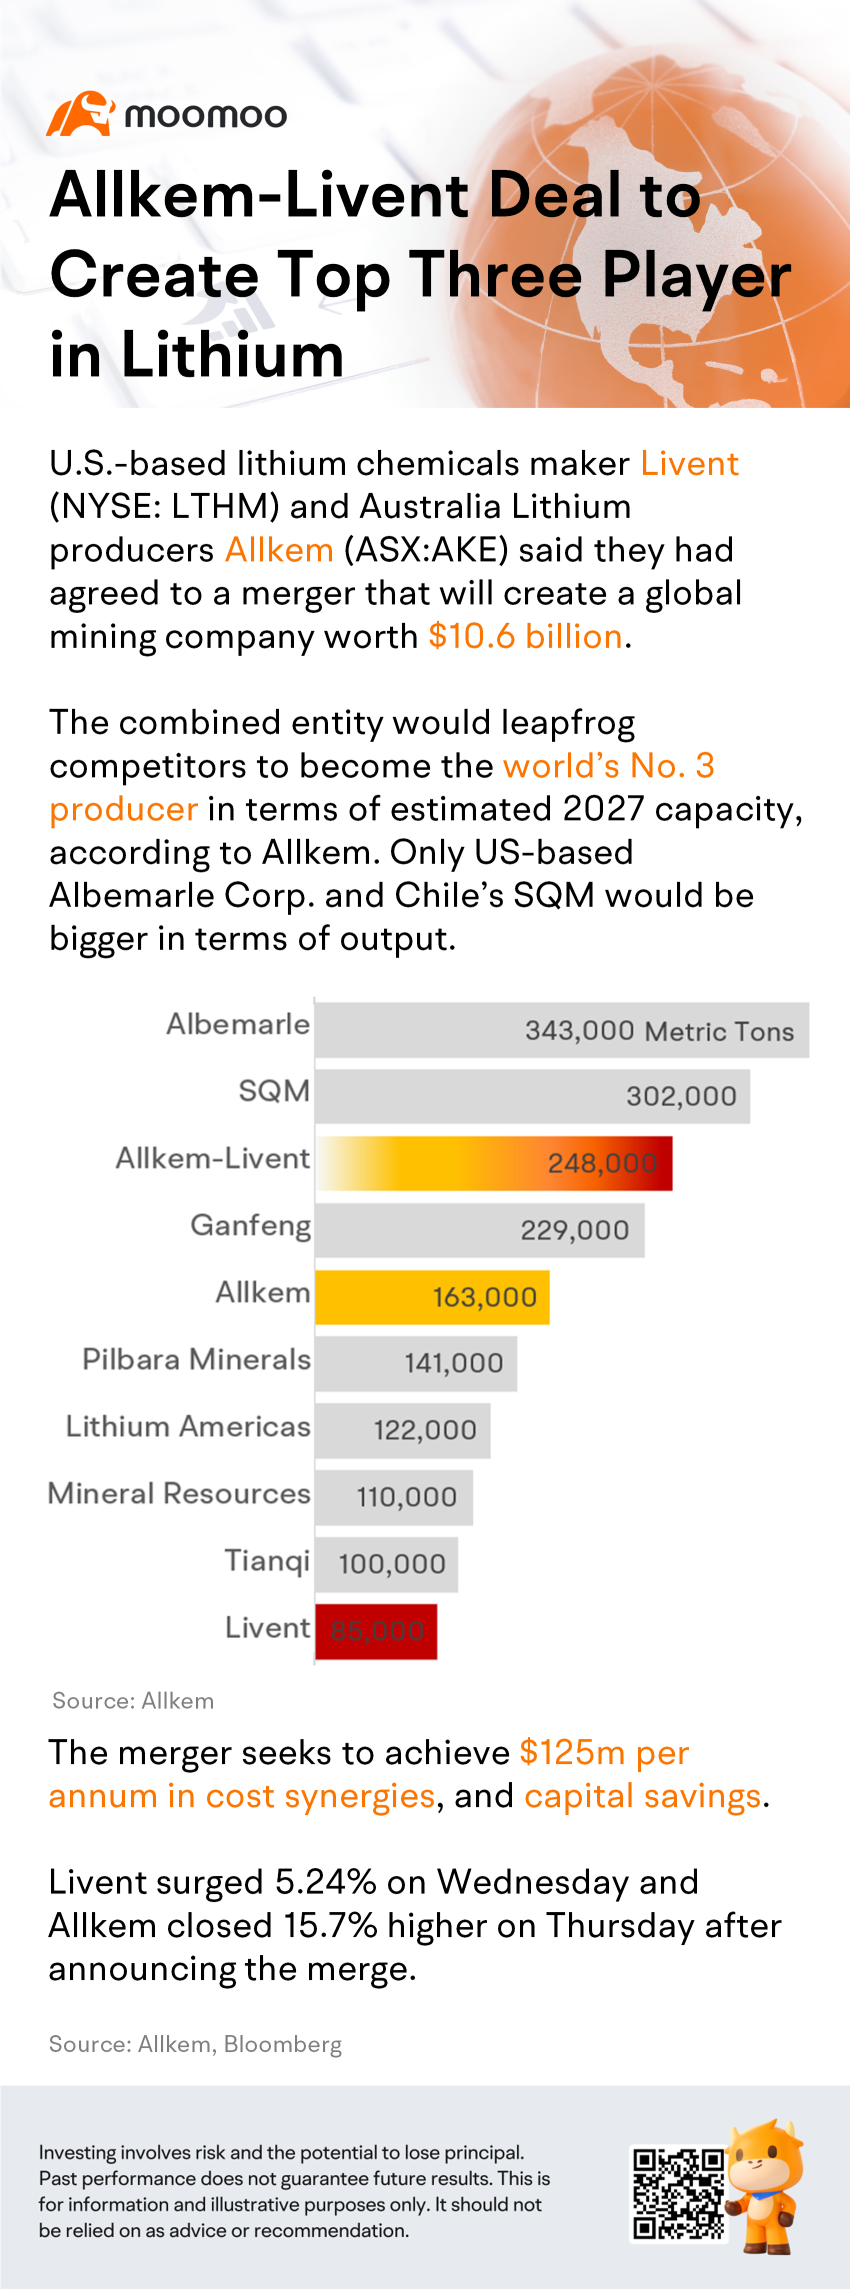 Allkem-Livent Deal to Create Top Three Player in Lithium